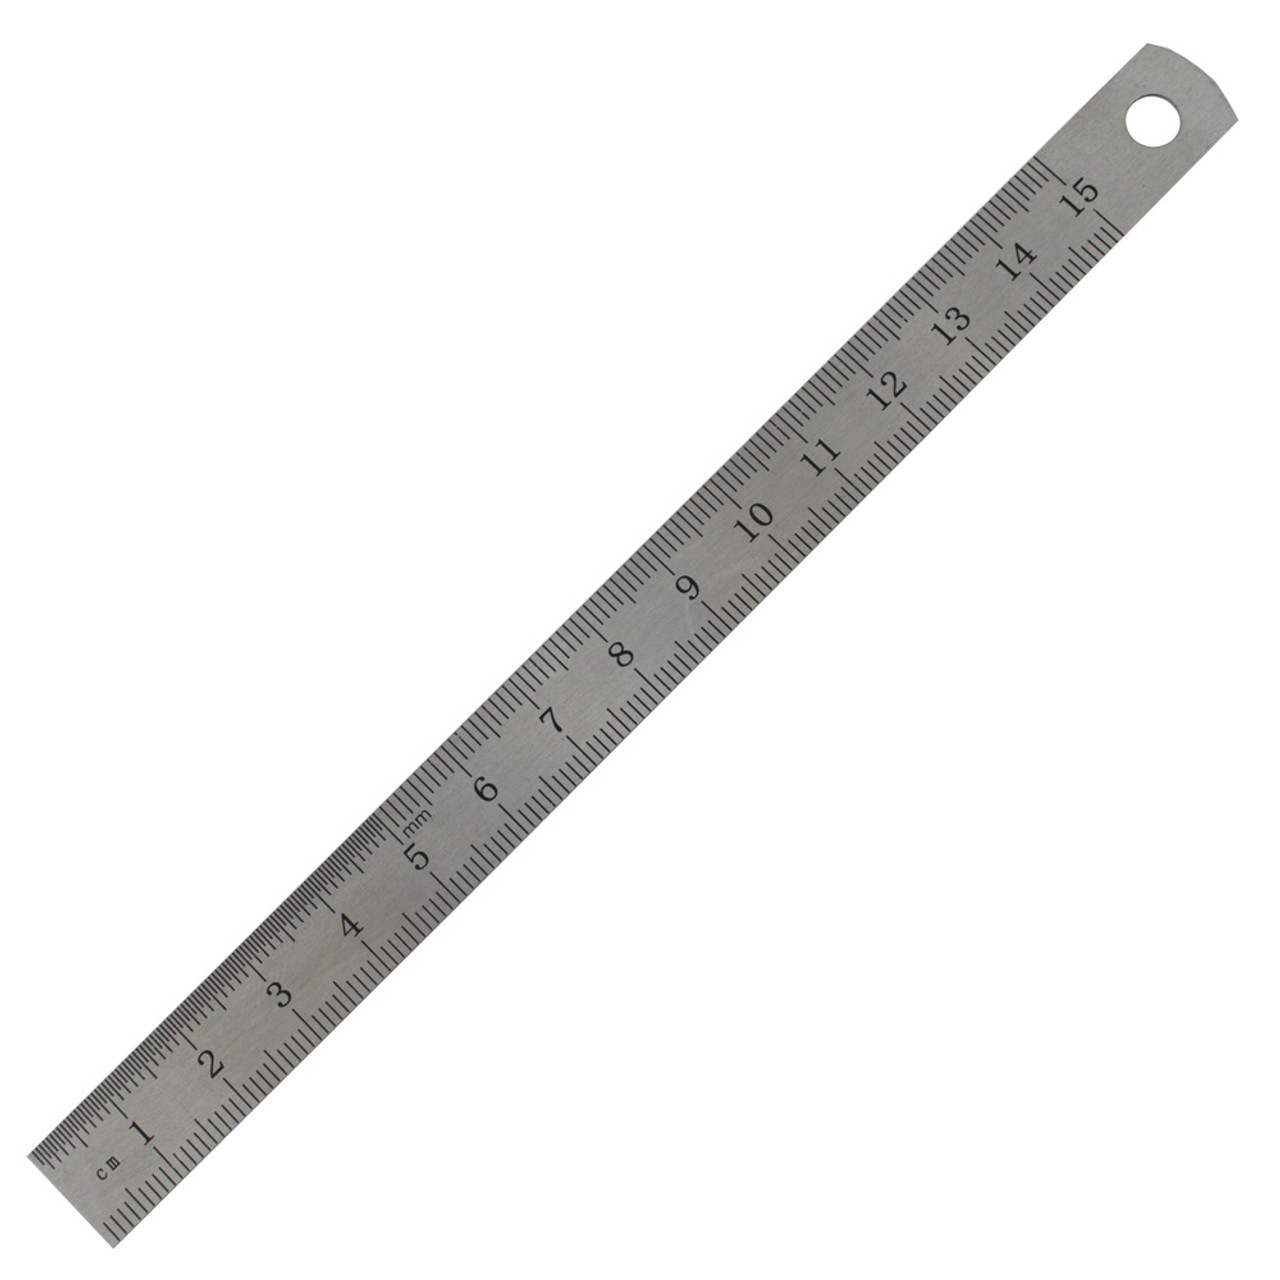 6 Inch Metal Ruler - in Inches And Centimeters